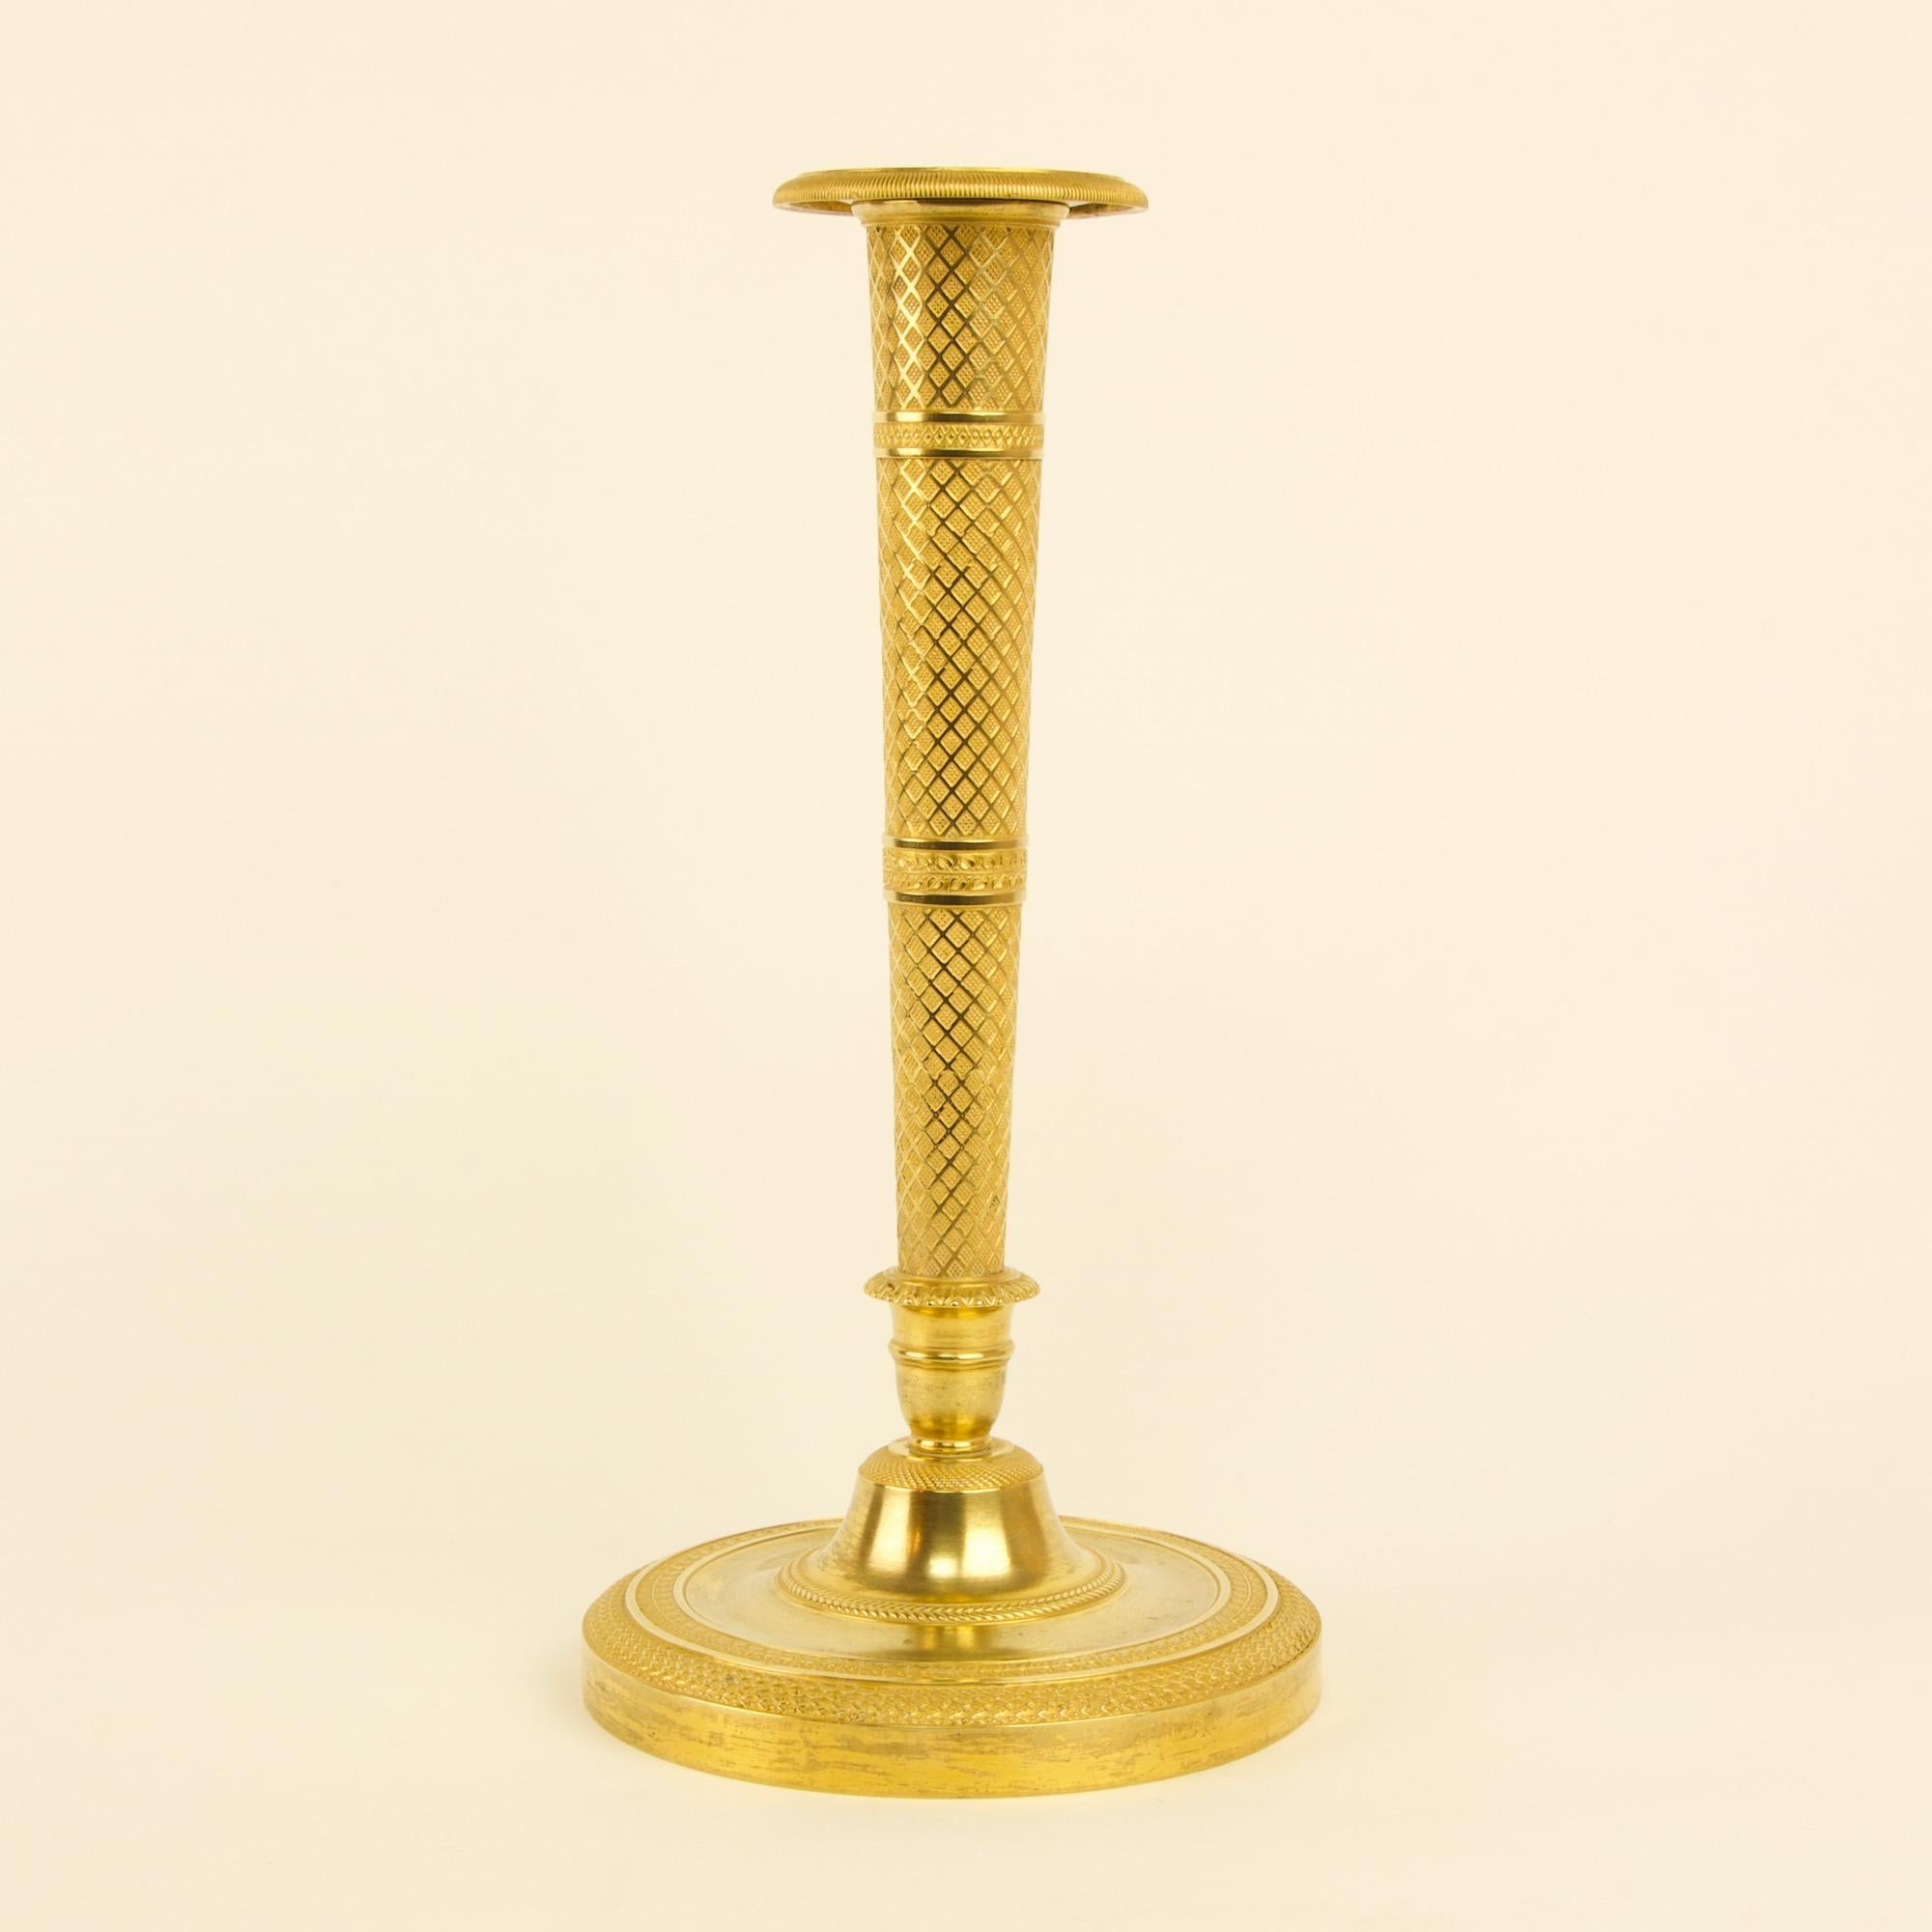 Pair of Early 19th Century French Empire Gilt Bronze Candlesticks after C. Galle For Sale 1